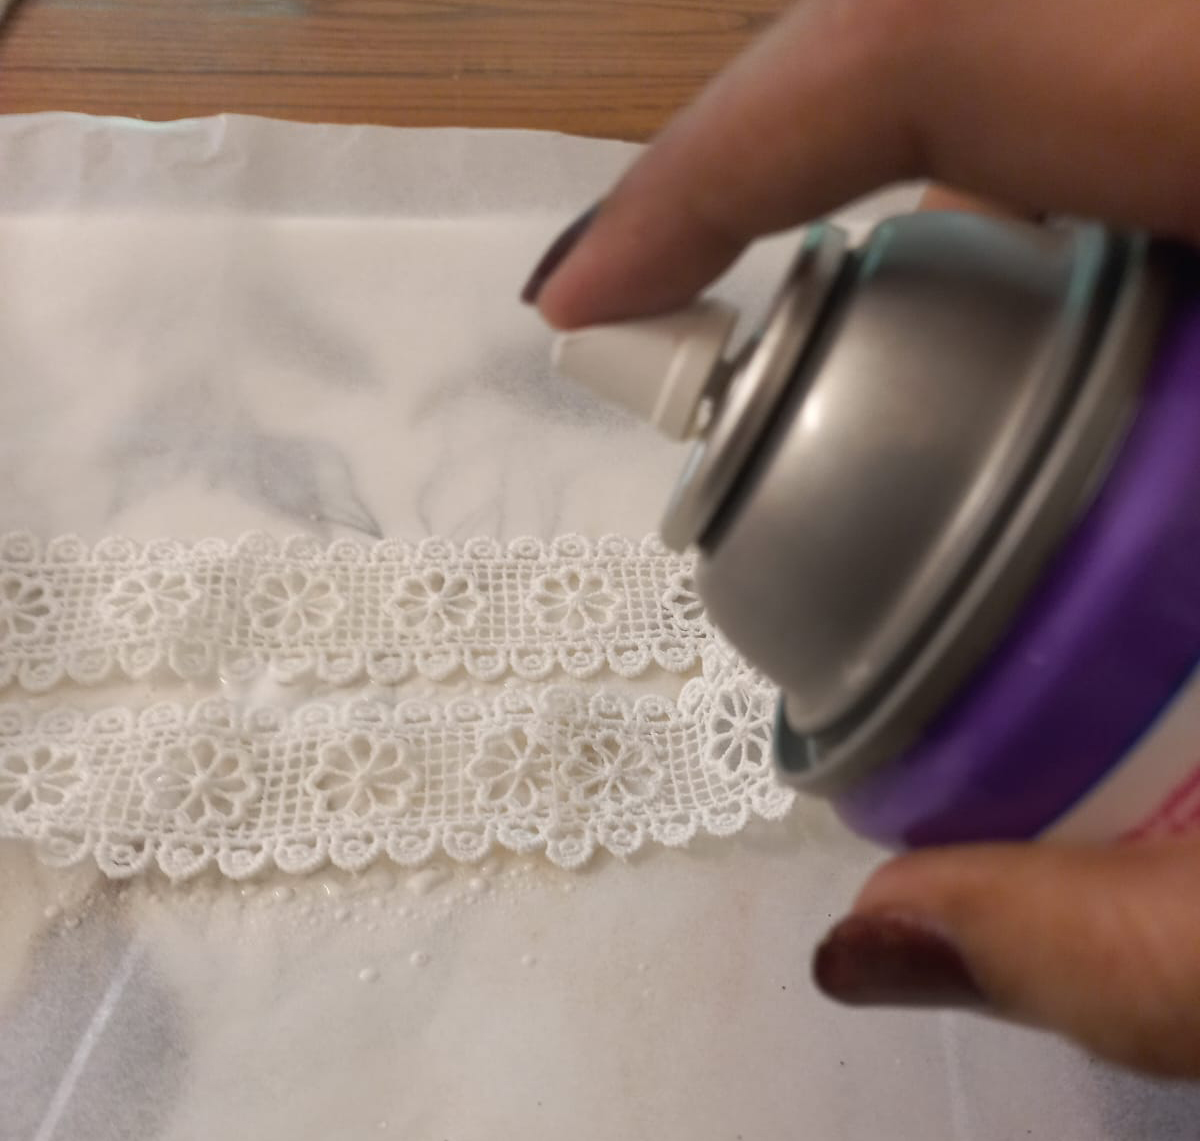 Making a lace crown tutorial fabric stiffener